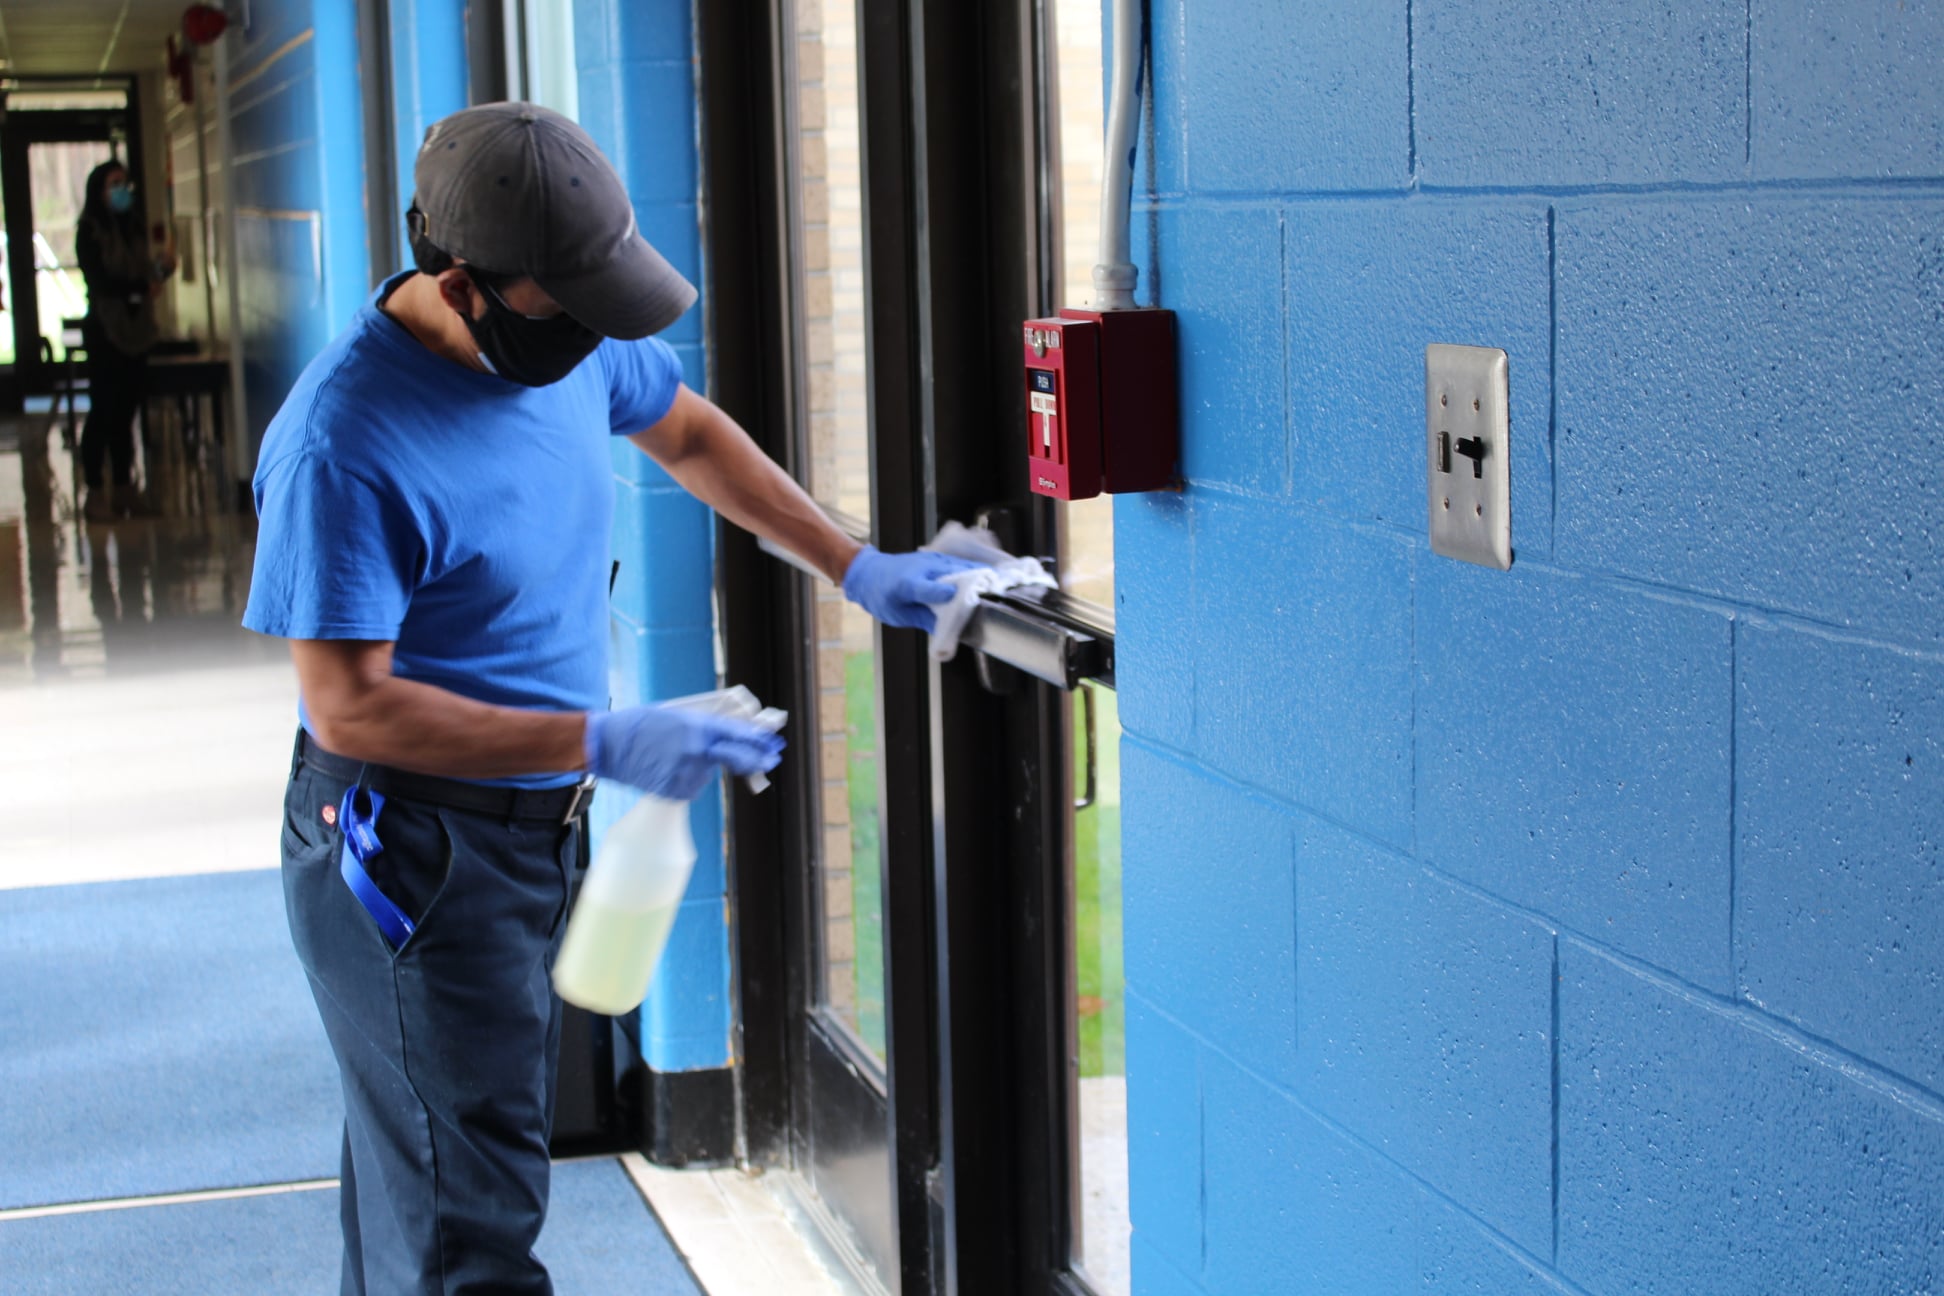 A custodian is cleaning a door handle. He's wearing a face mask and holding a cloth and spray bottle.